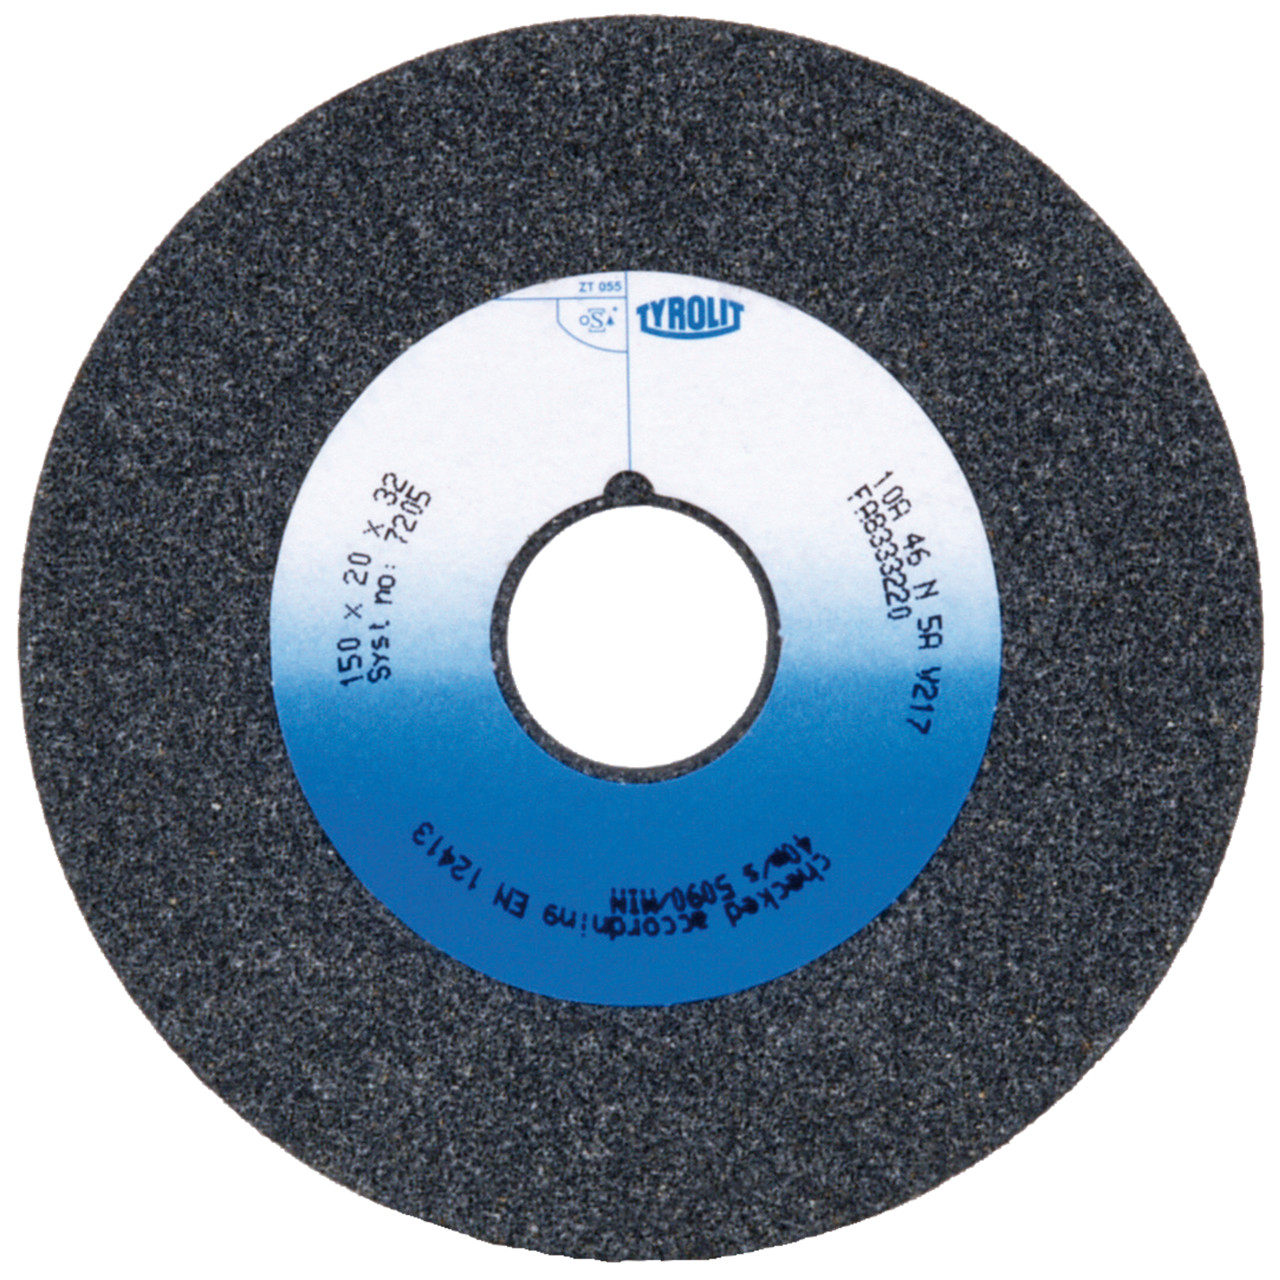 Tyrolit Conventional ceramic grinding discs DxDxH 300x40x51 For unalloyed and low-alloy steels, shape: 1, Art. 110032